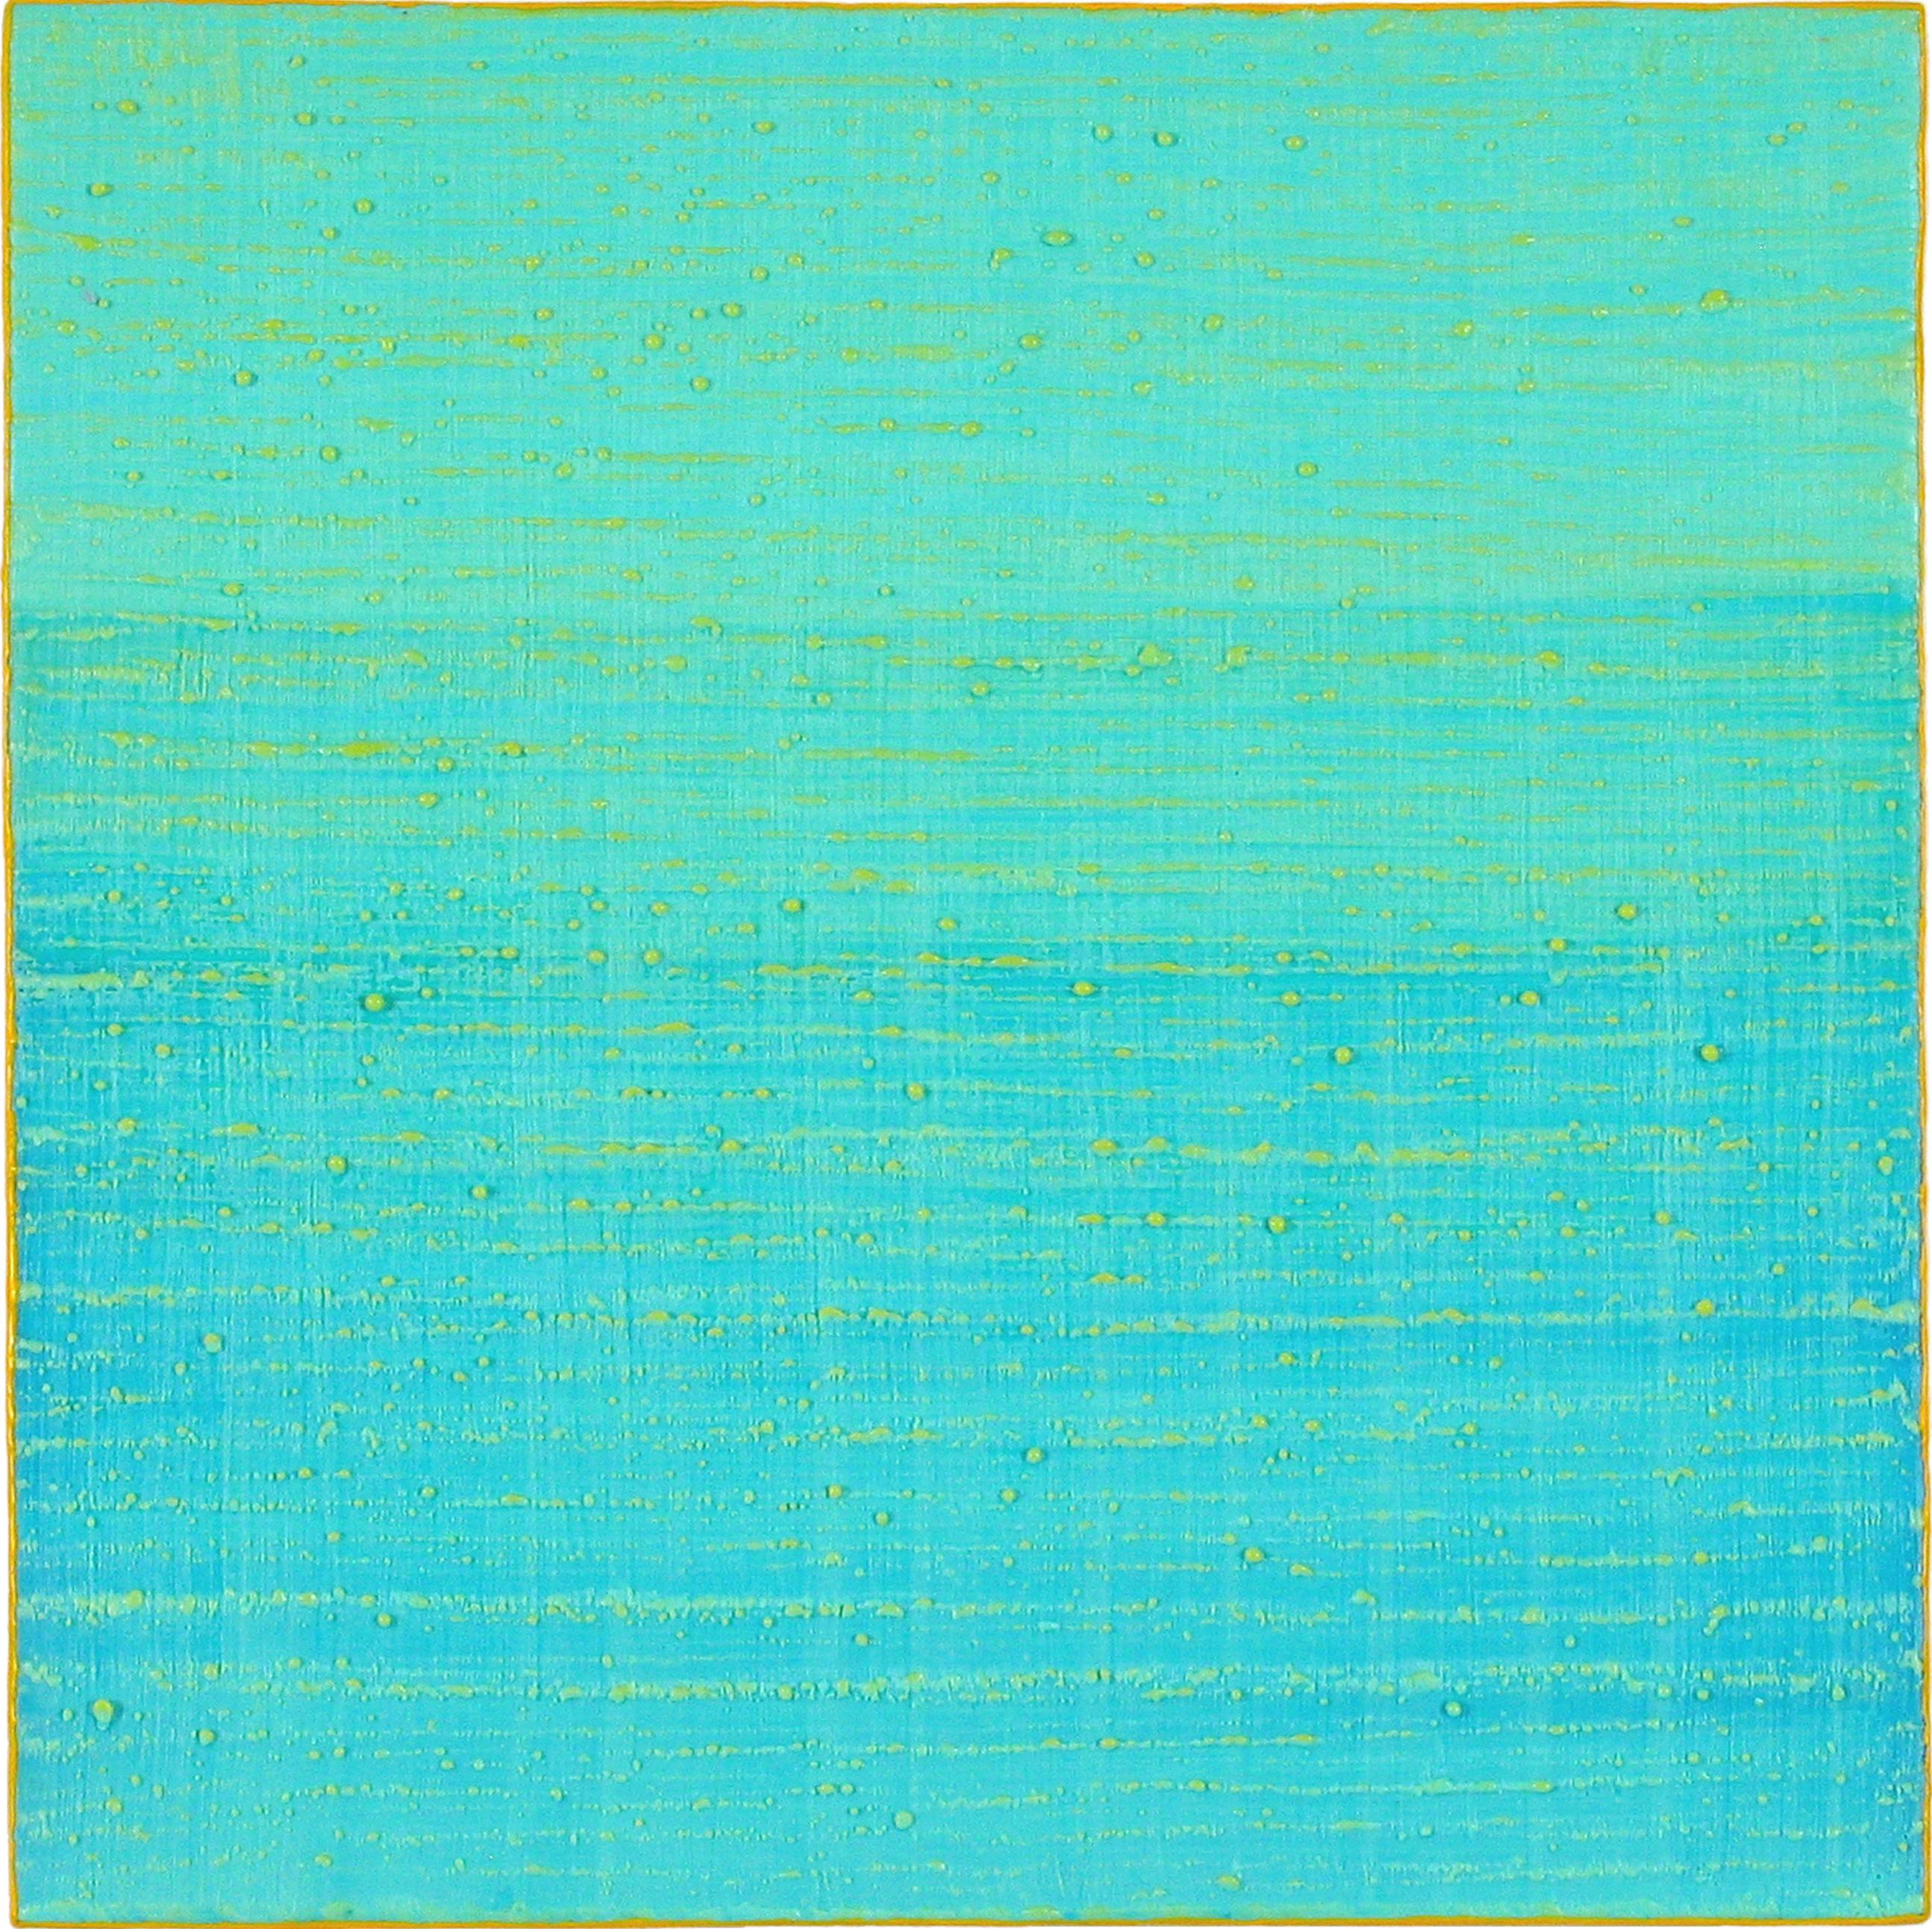 Silk Road 241, Square Color Field Encaustic Painting in Teal Blue, Lime Green